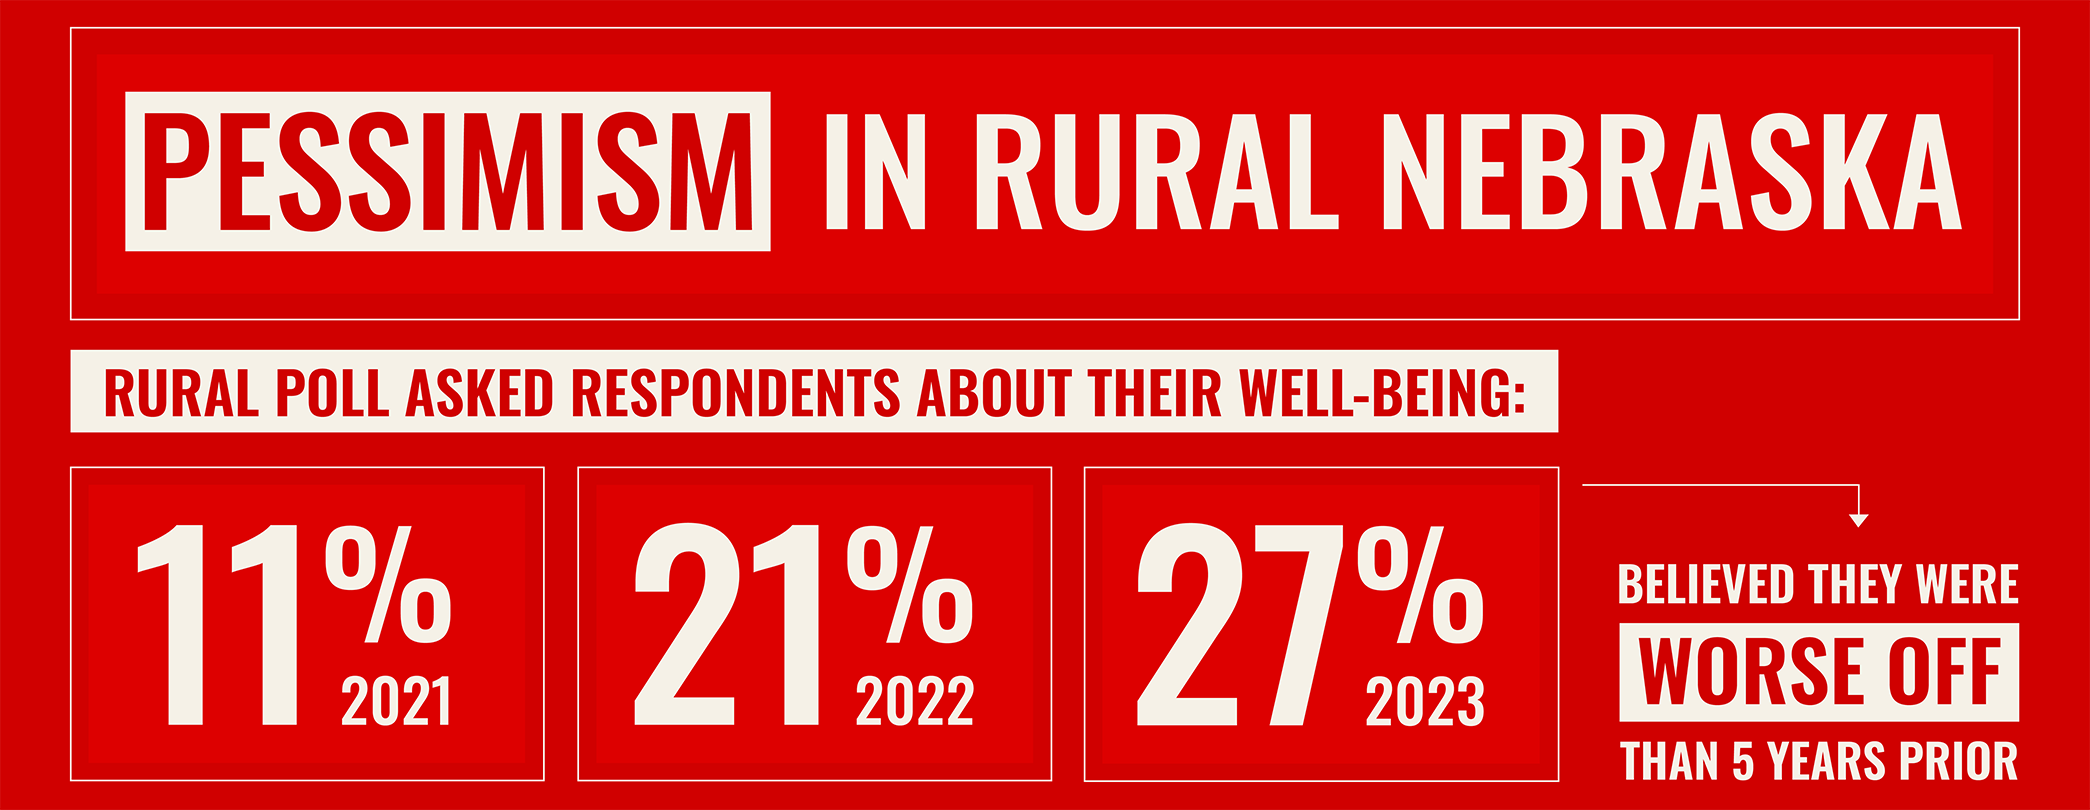 Red-and-white graphic that reads: "Pessimism in rural Nebraska. Rural Poll asked respondents about their well-being: 11% (2021), 21% (2022), 27% (2023) believed they were worse off than five years prior."